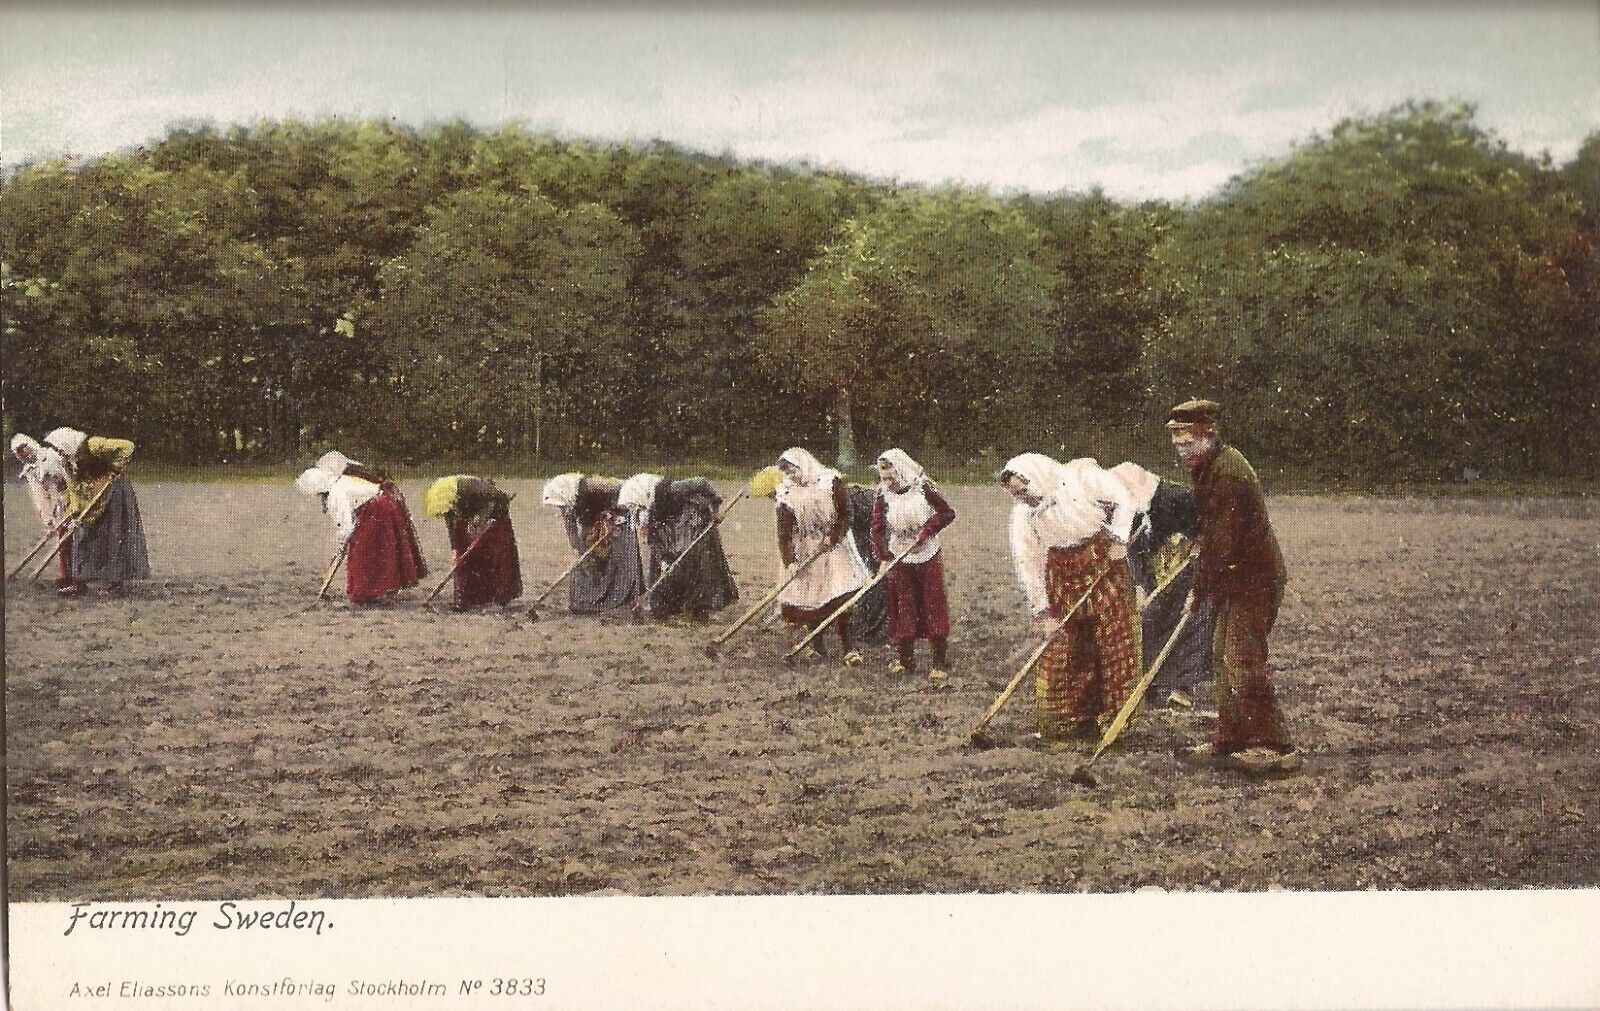 AGRICULTURE - Farming in Sweden